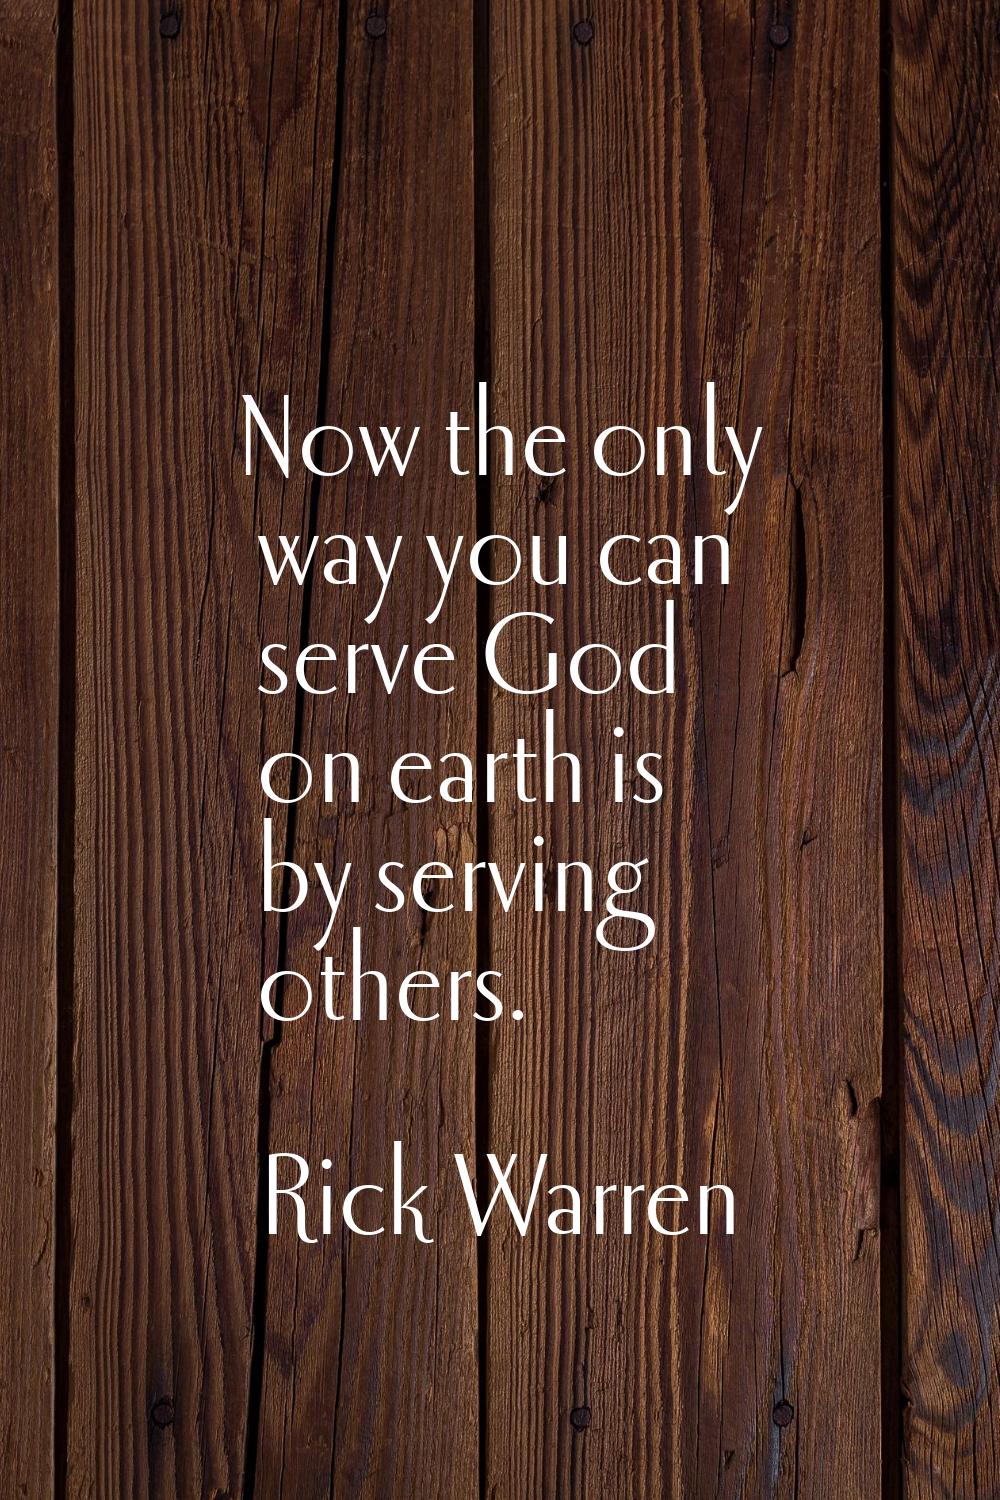 Now the only way you can serve God on earth is by serving others.